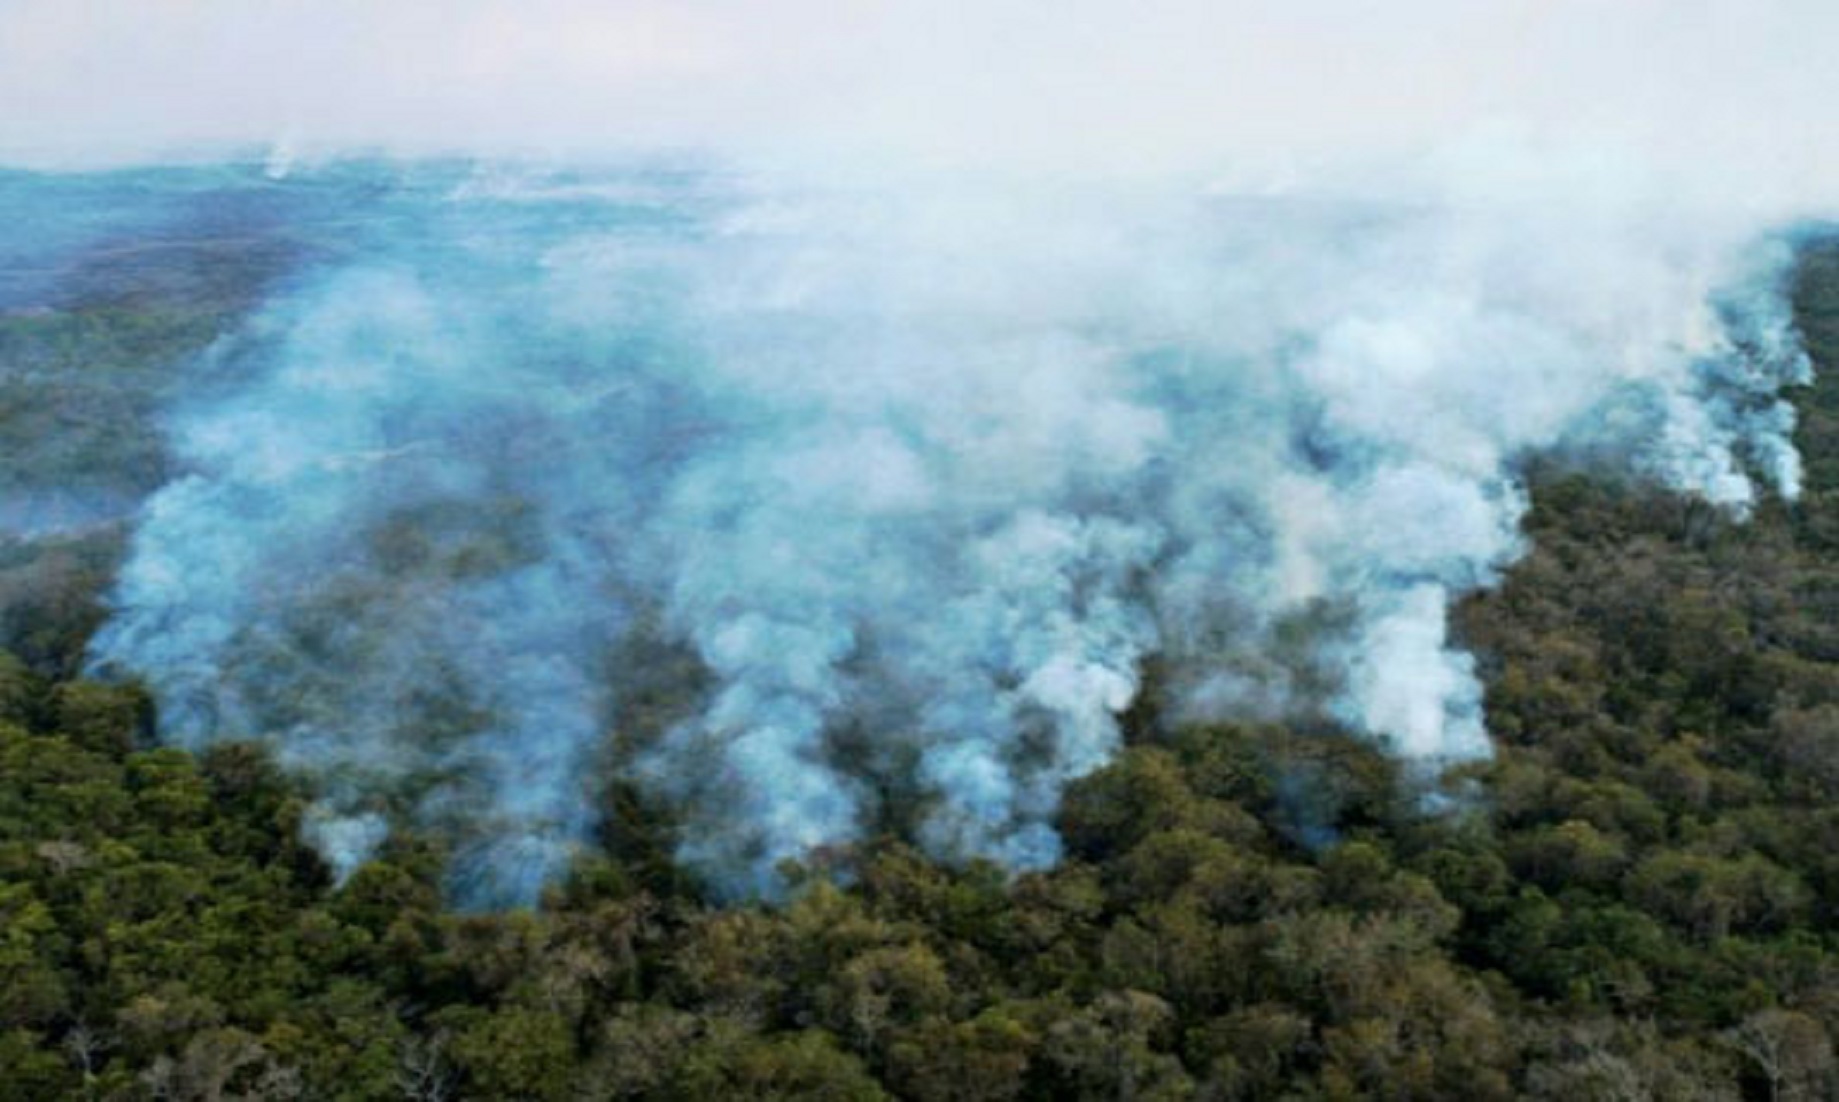 Brazil firefighters race to contain wetland blazes